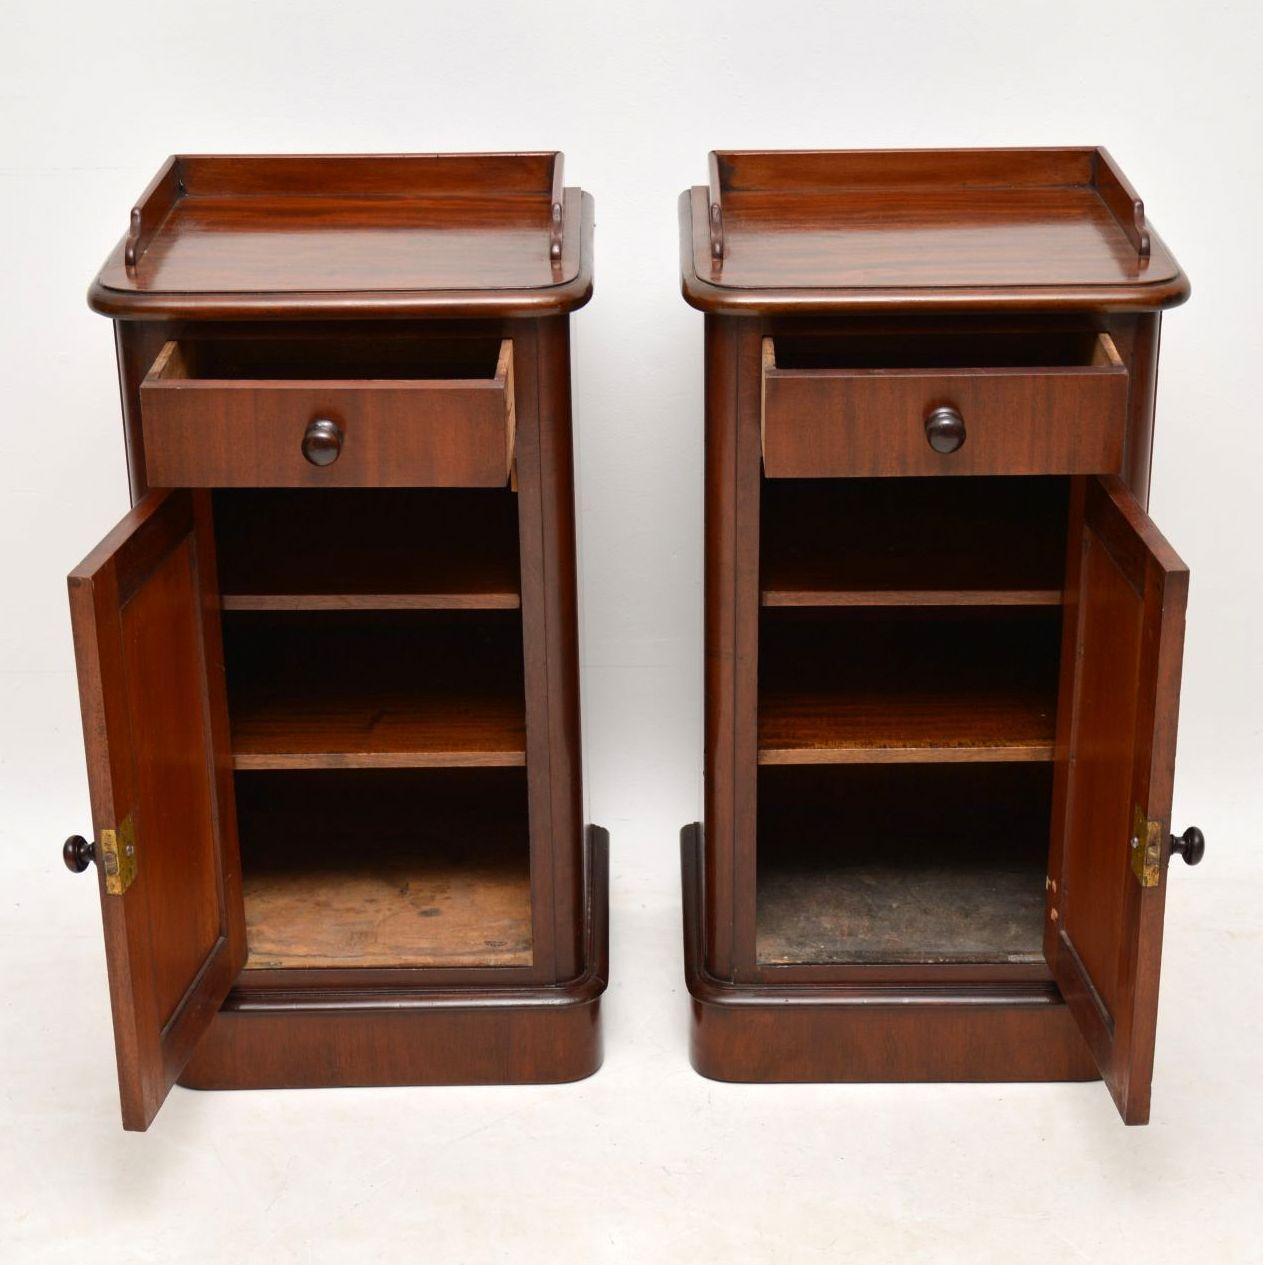 English Pair of Antique Victorian Mahogany Bedside Cabinets